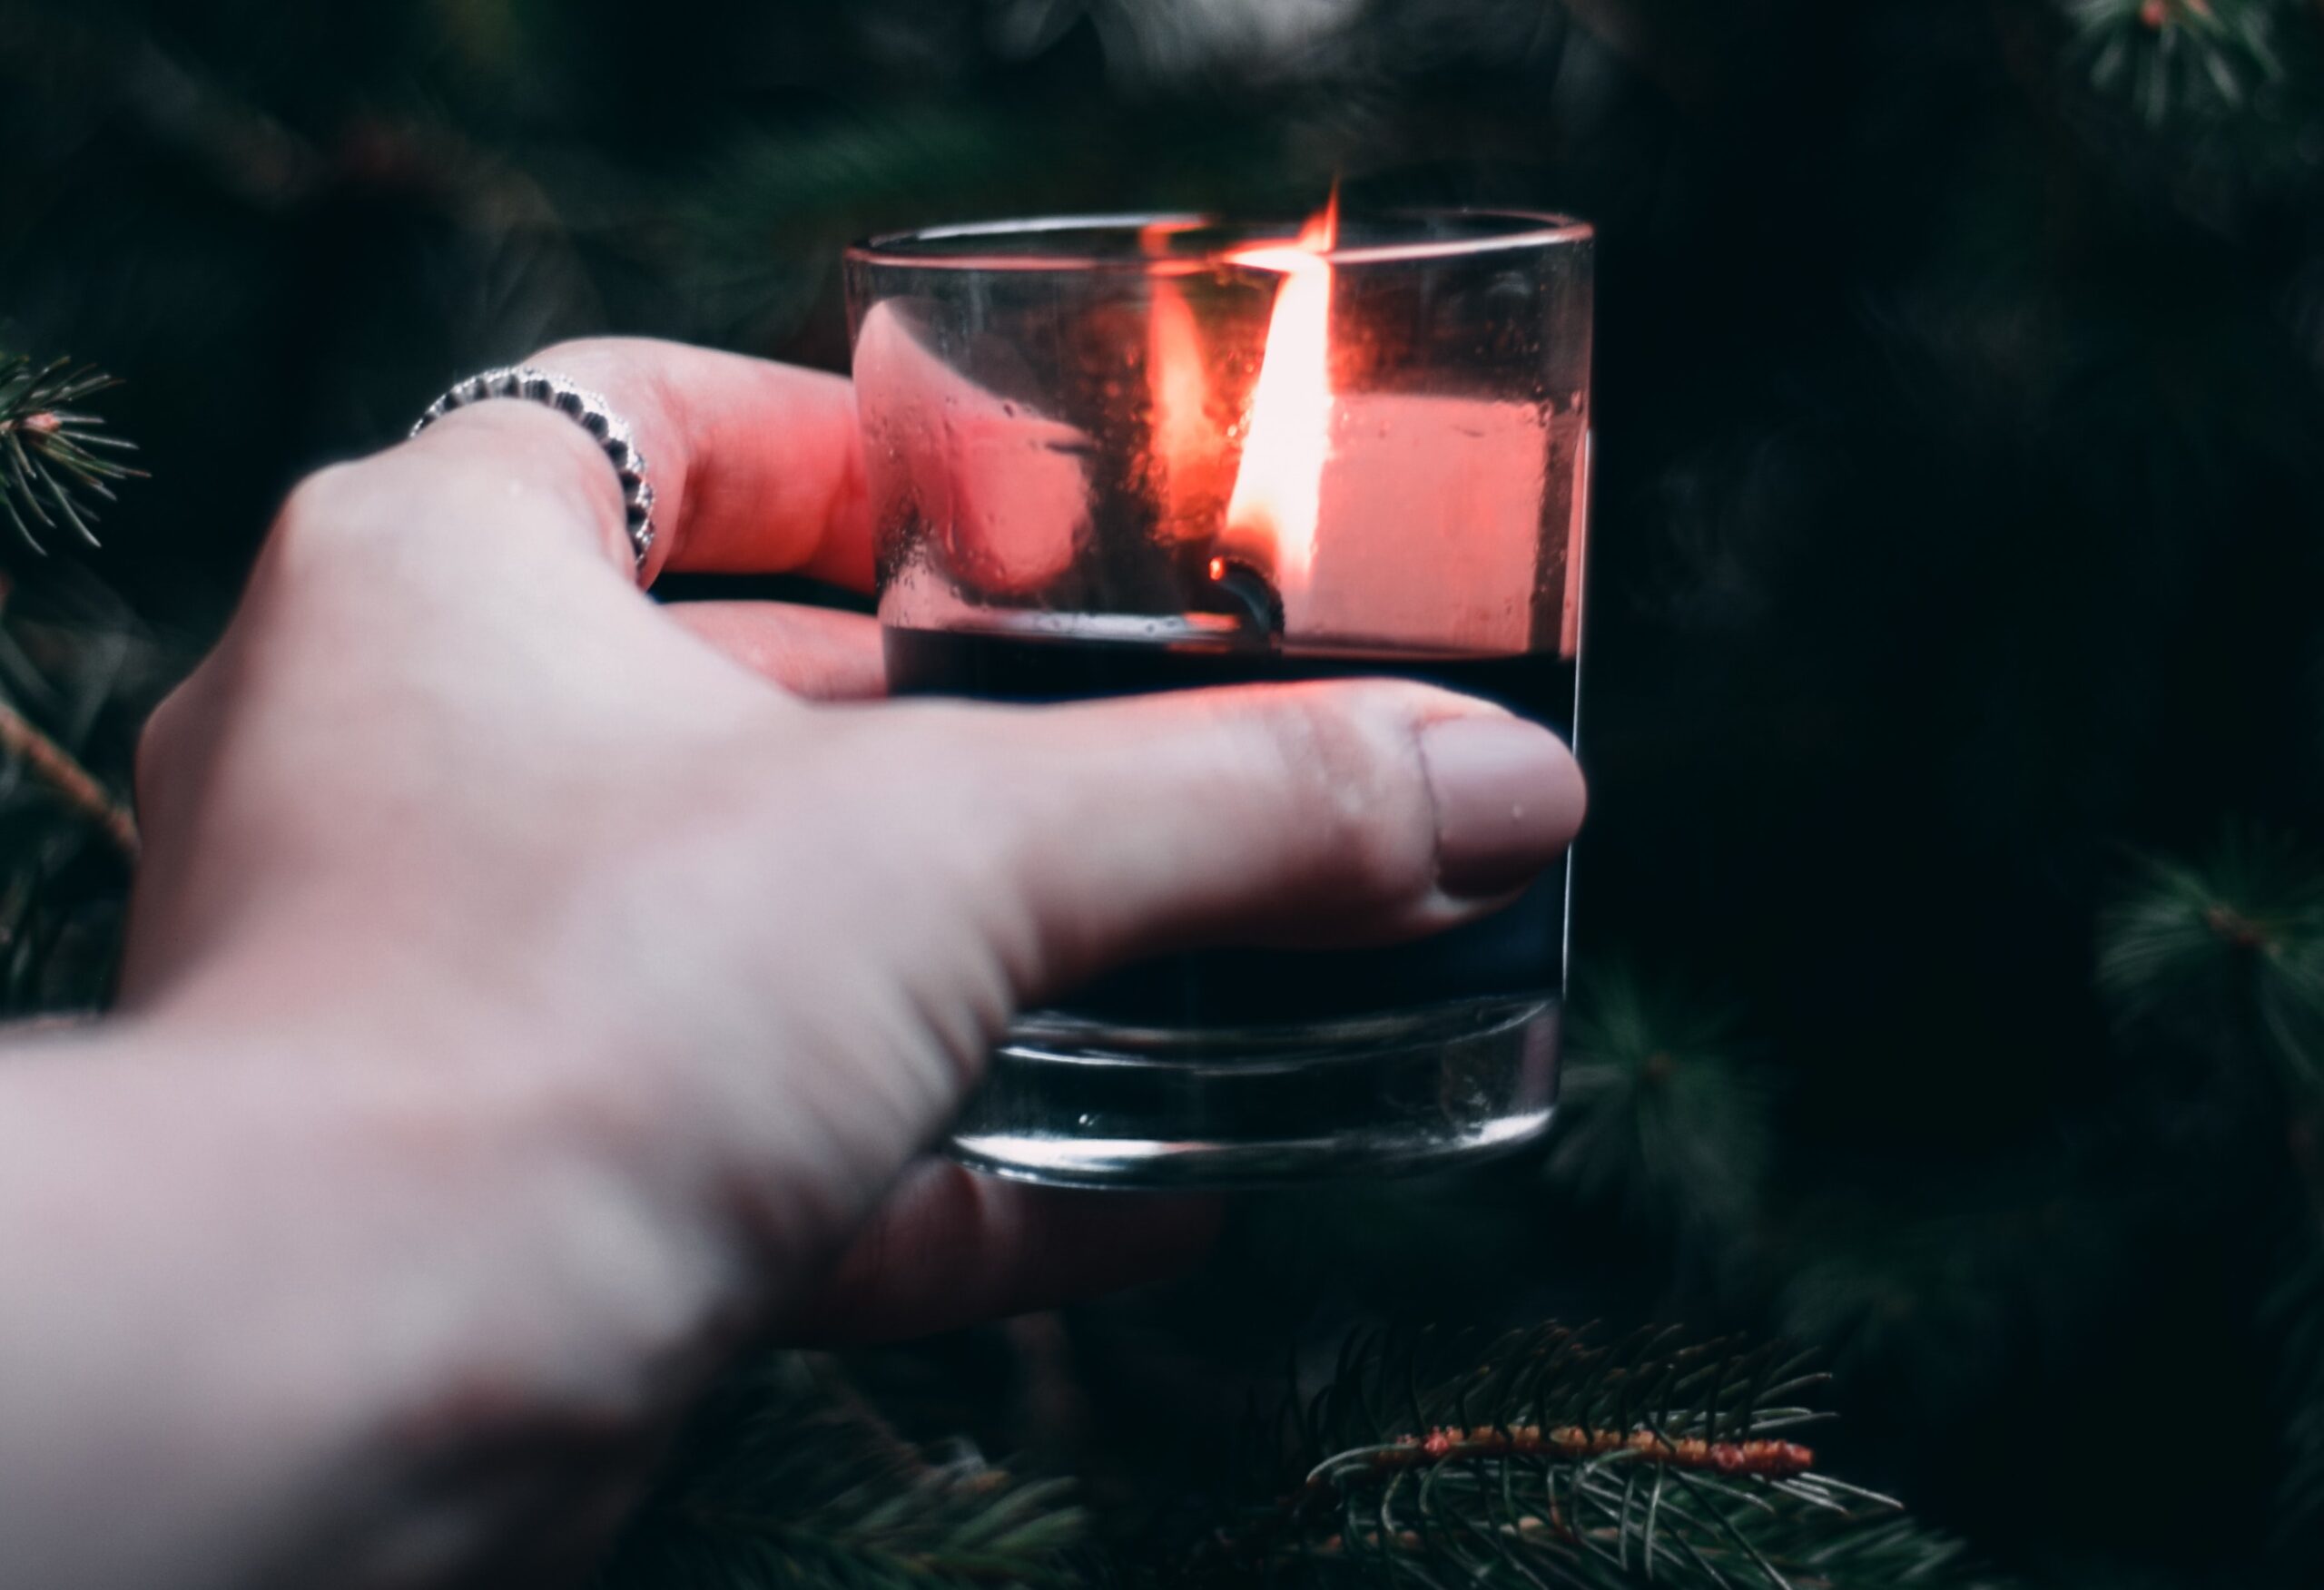 white hand holding lit candle in small glass jar